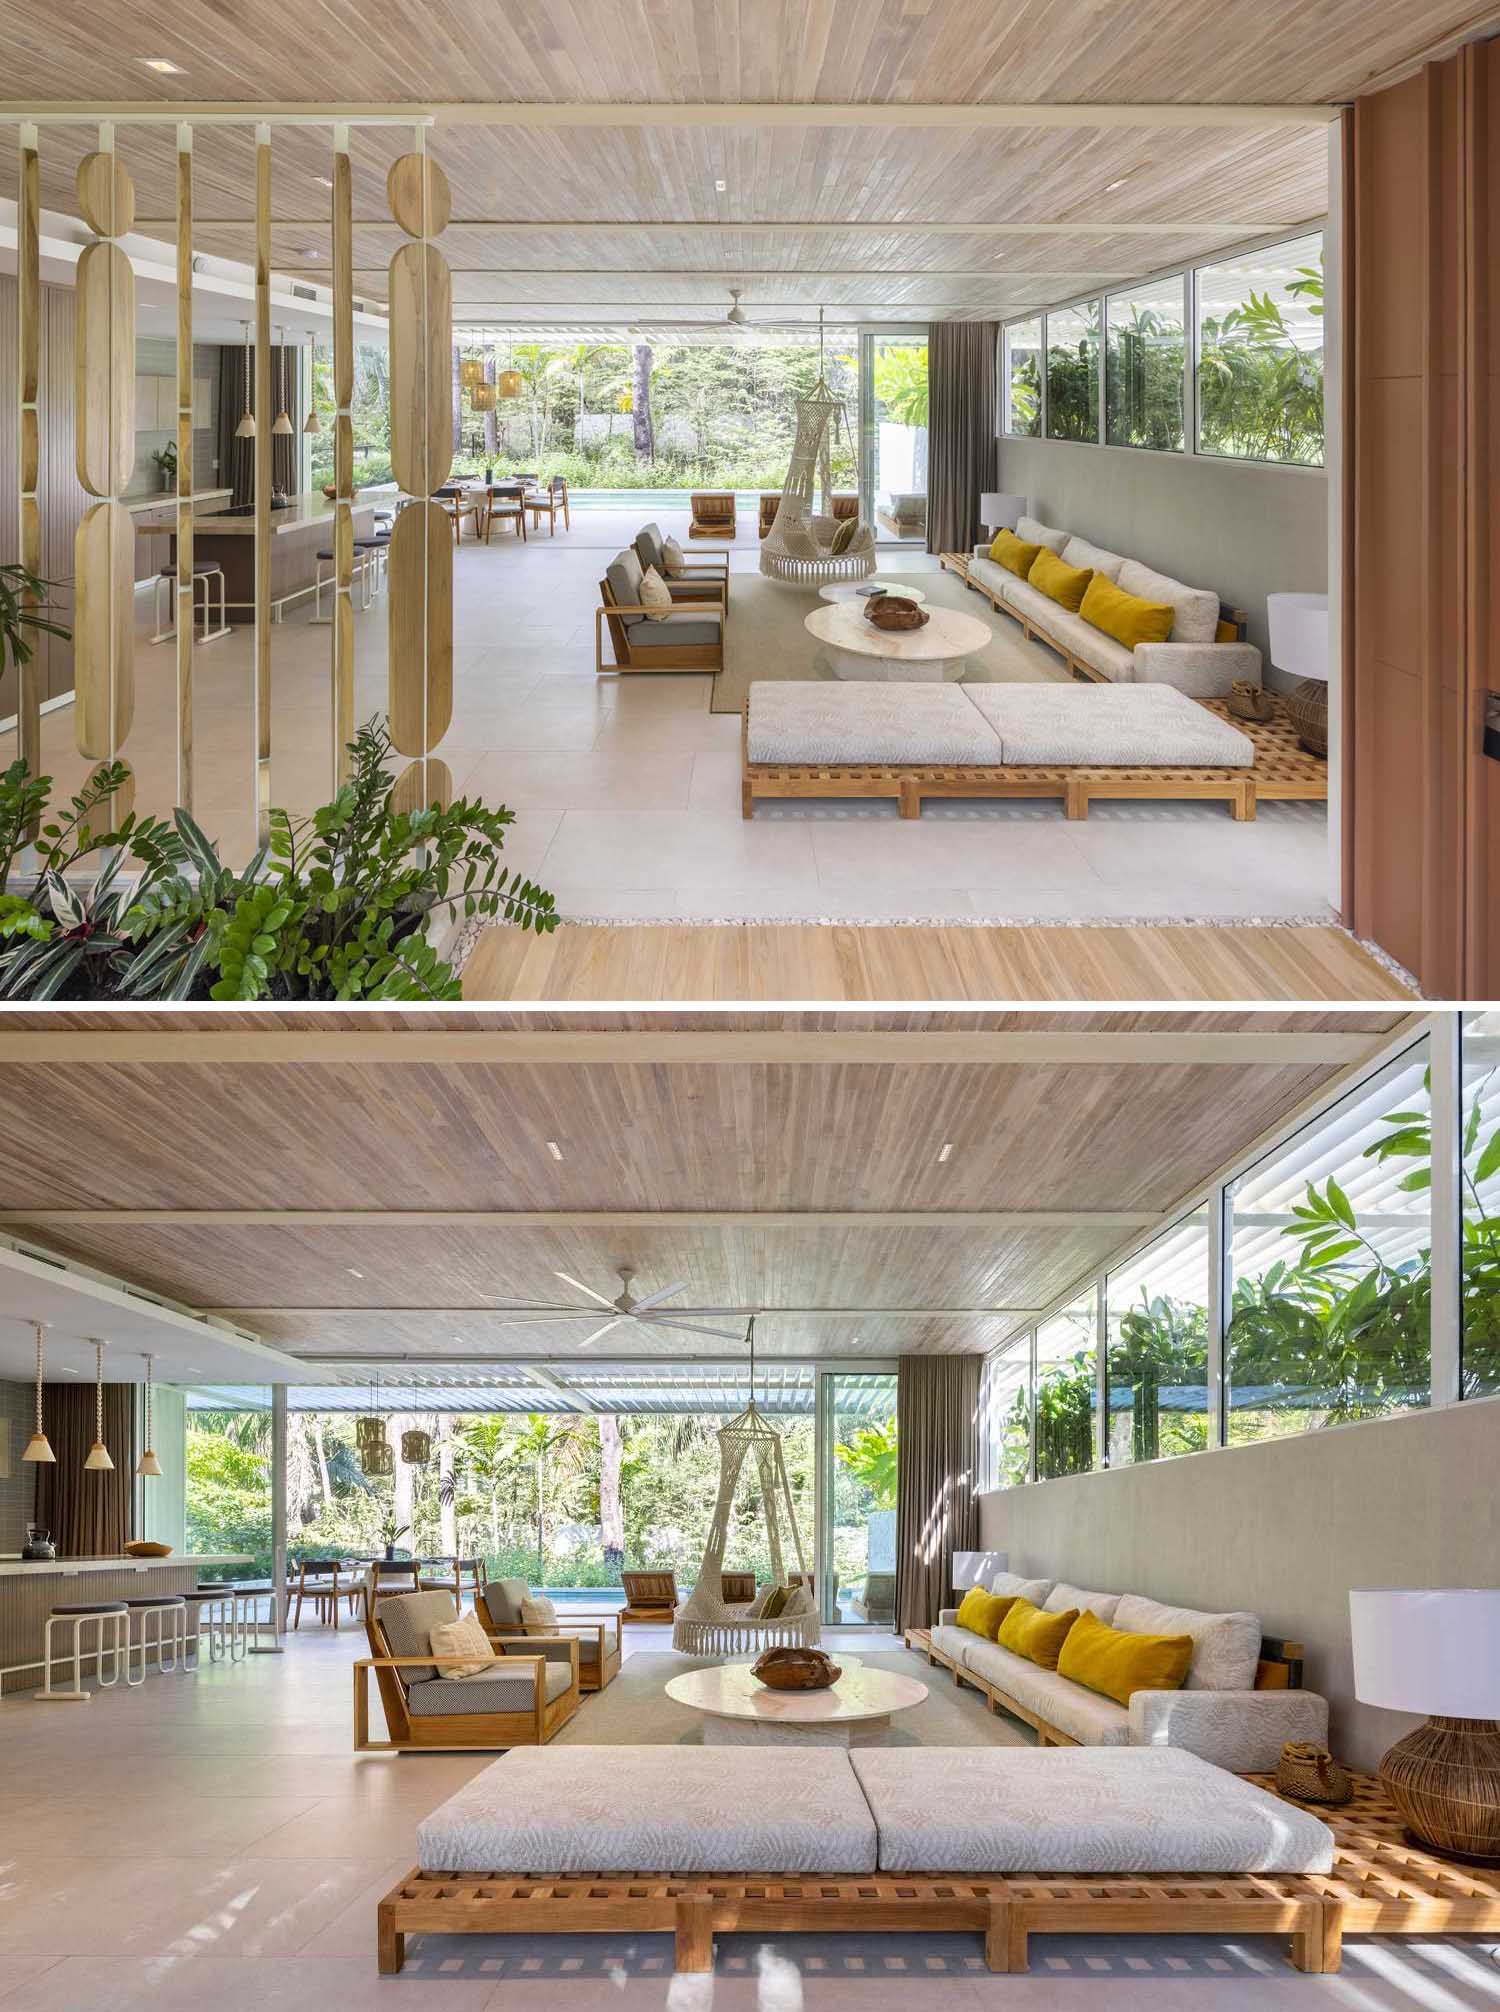 Inside this modern home, bleached teak was used for ceilings and floors and large aluminum window systems open and close completely to allow for full flexibility of space.